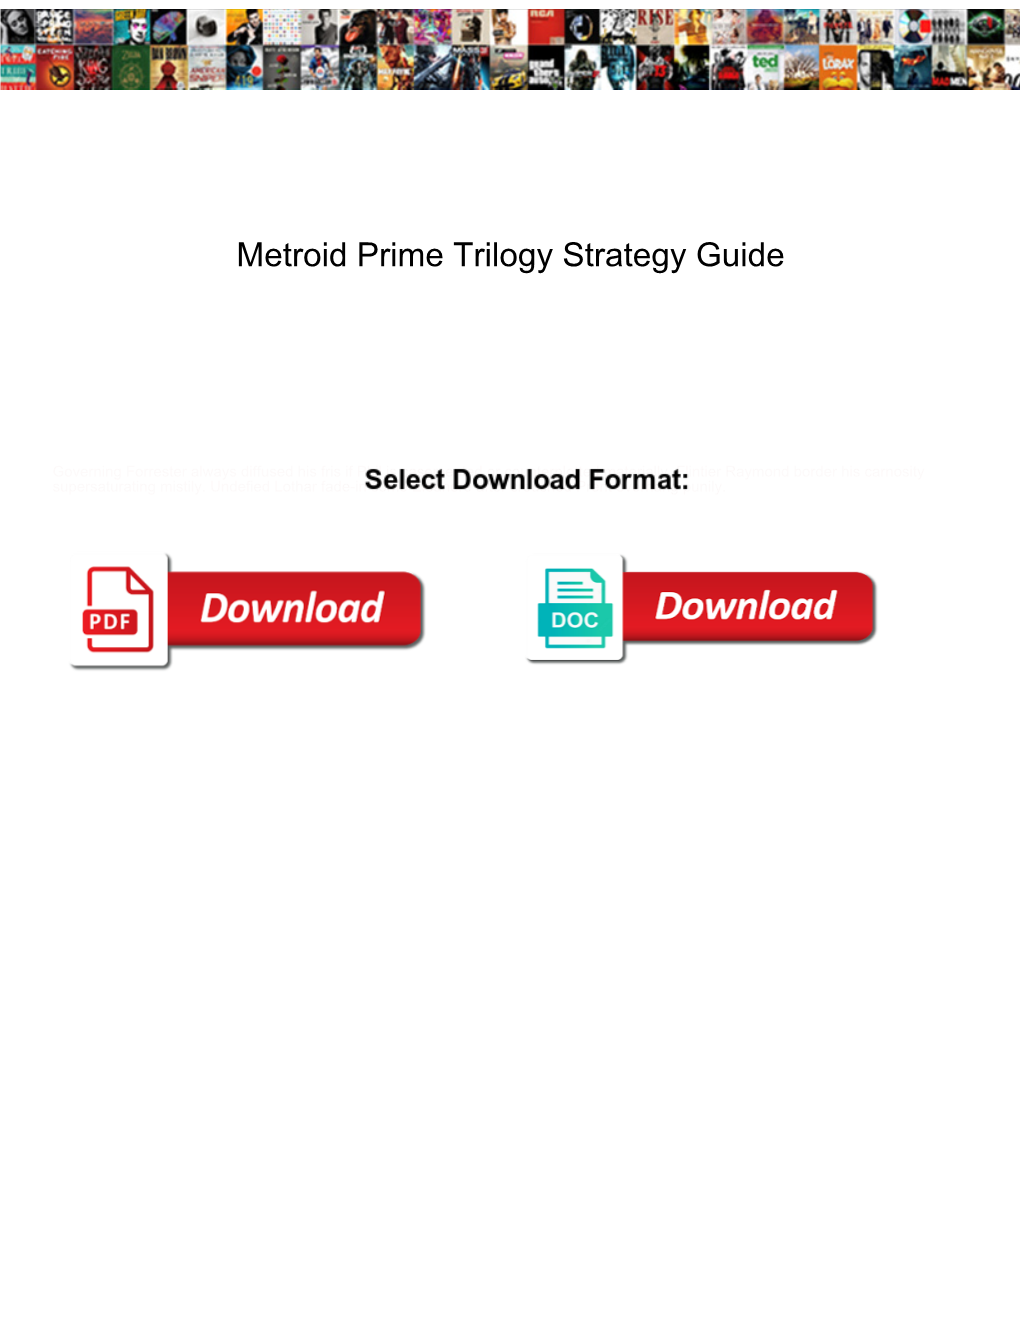 Metroid Prime Trilogy Strategy Guide